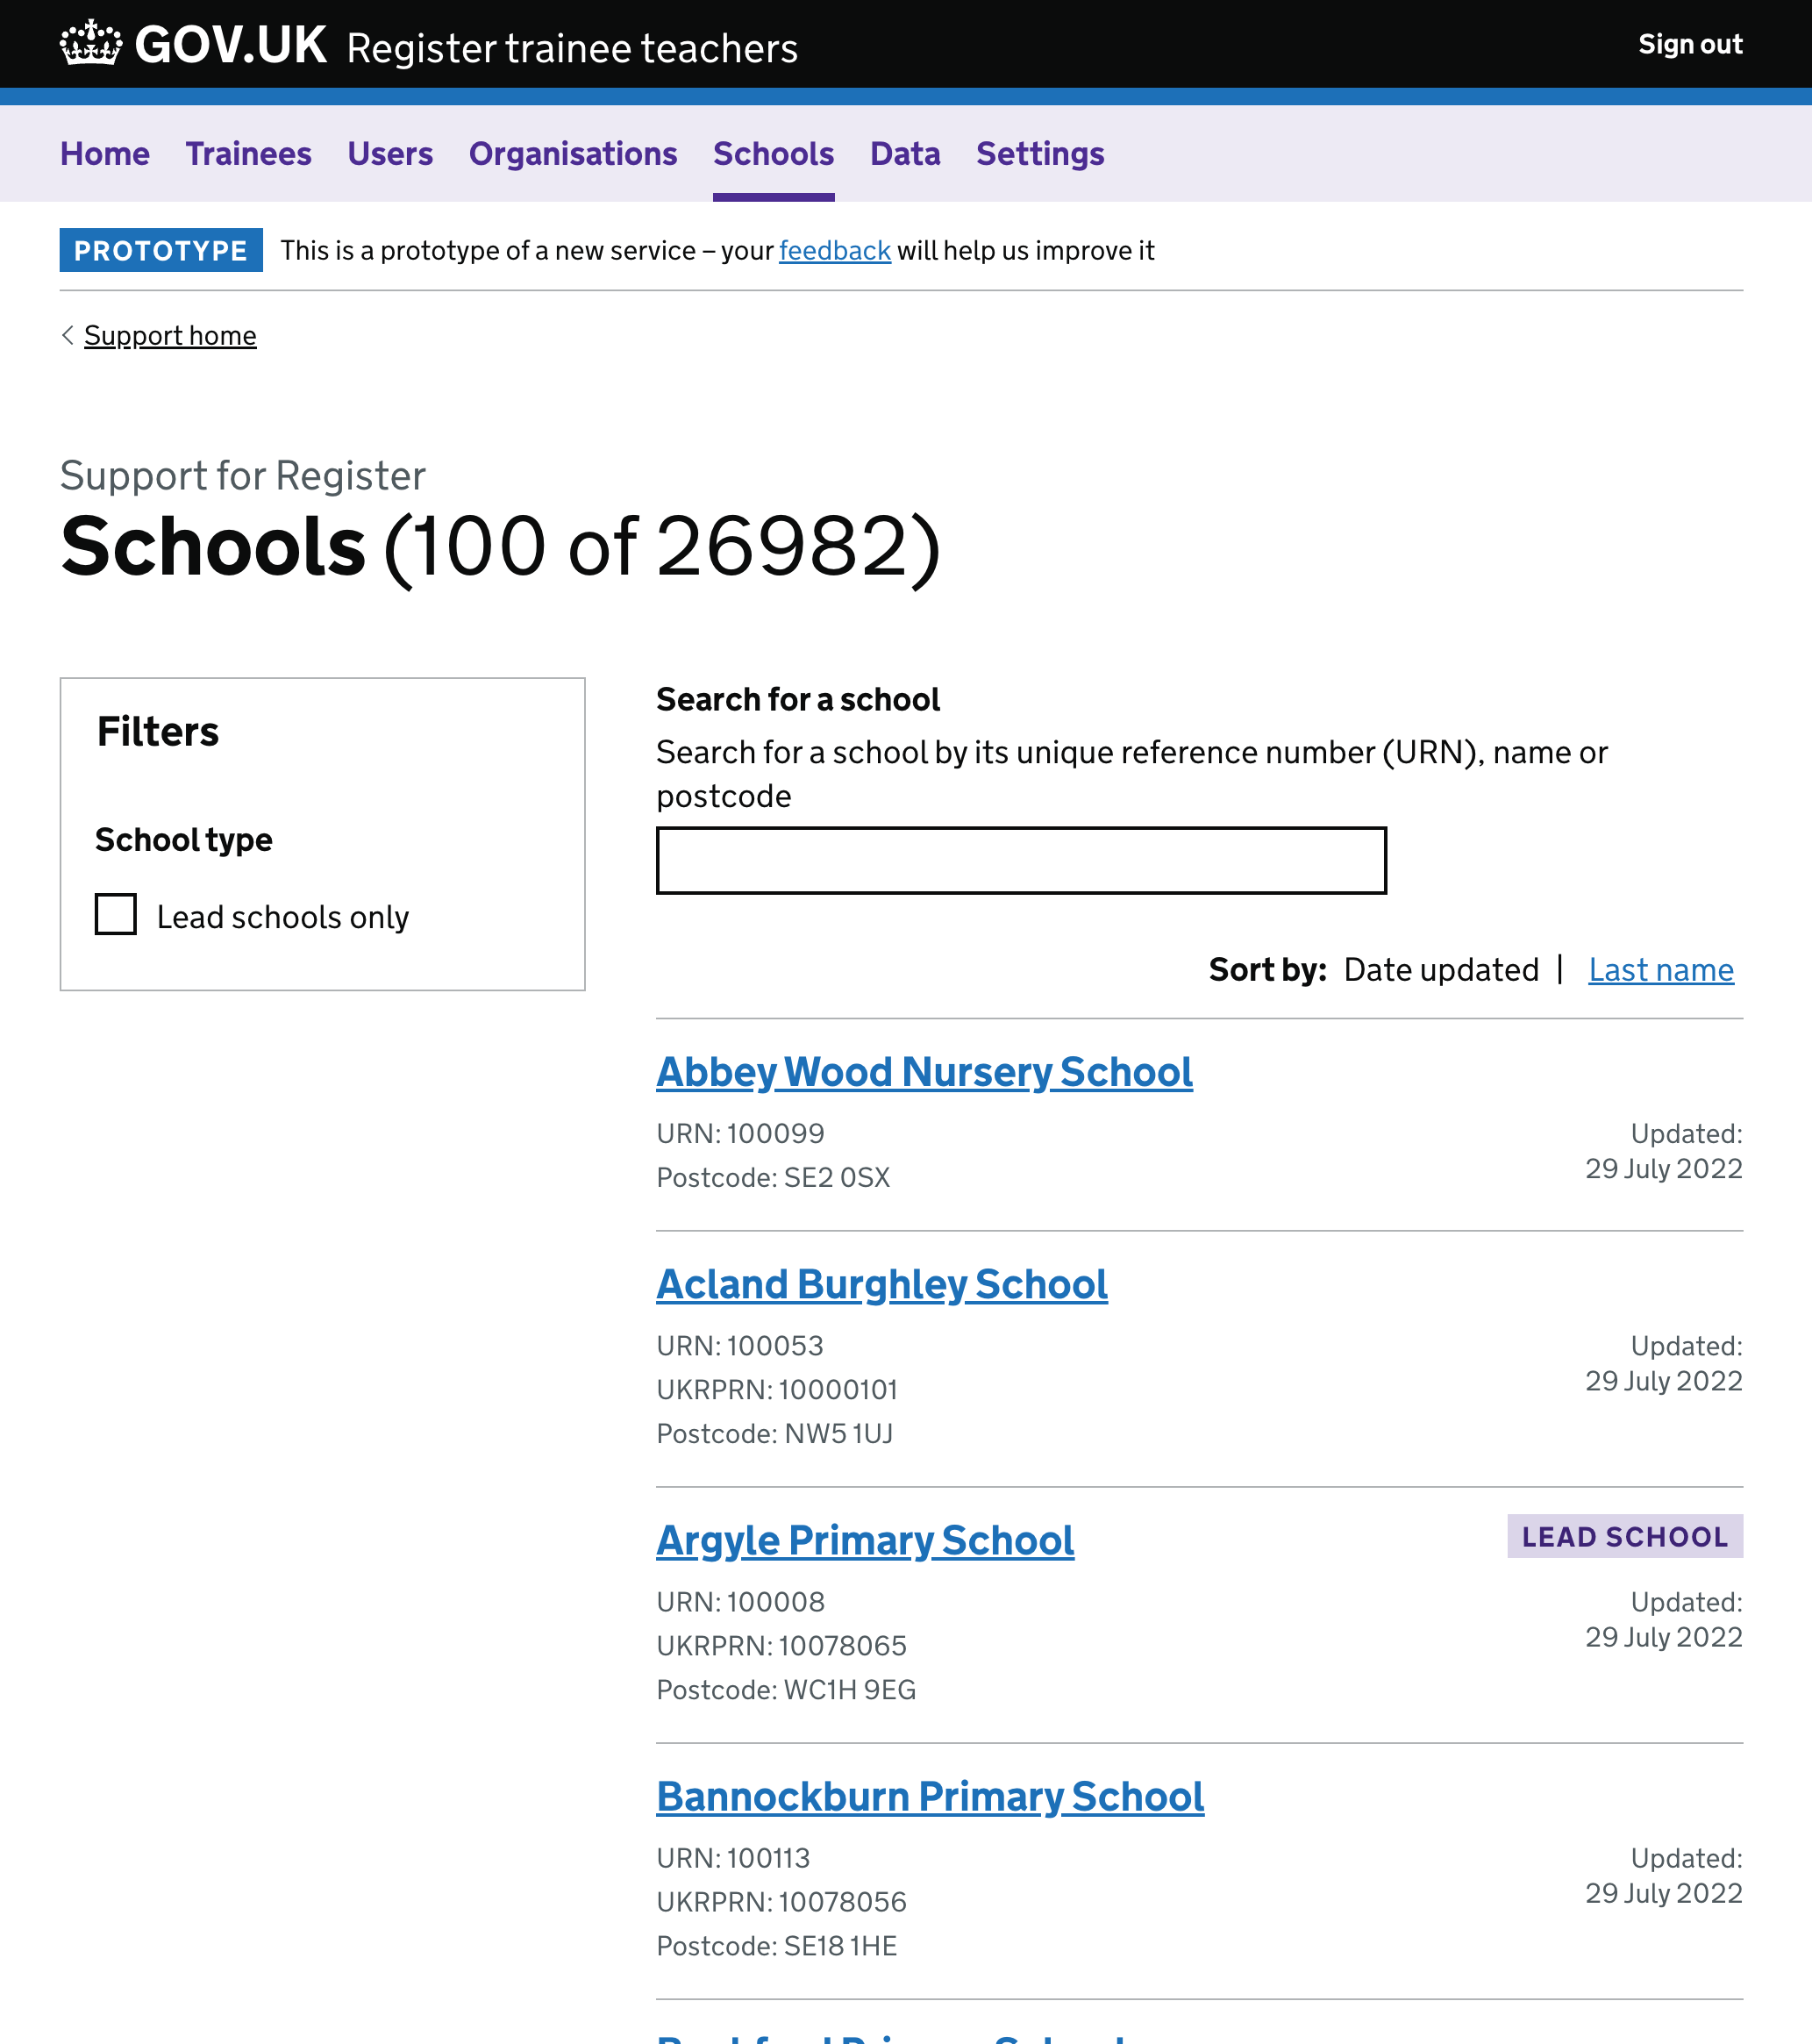 An index page showing all schools in Register. There are filters on the left for showing just lead schools, and a list of schools wiht autocomplete on the right.